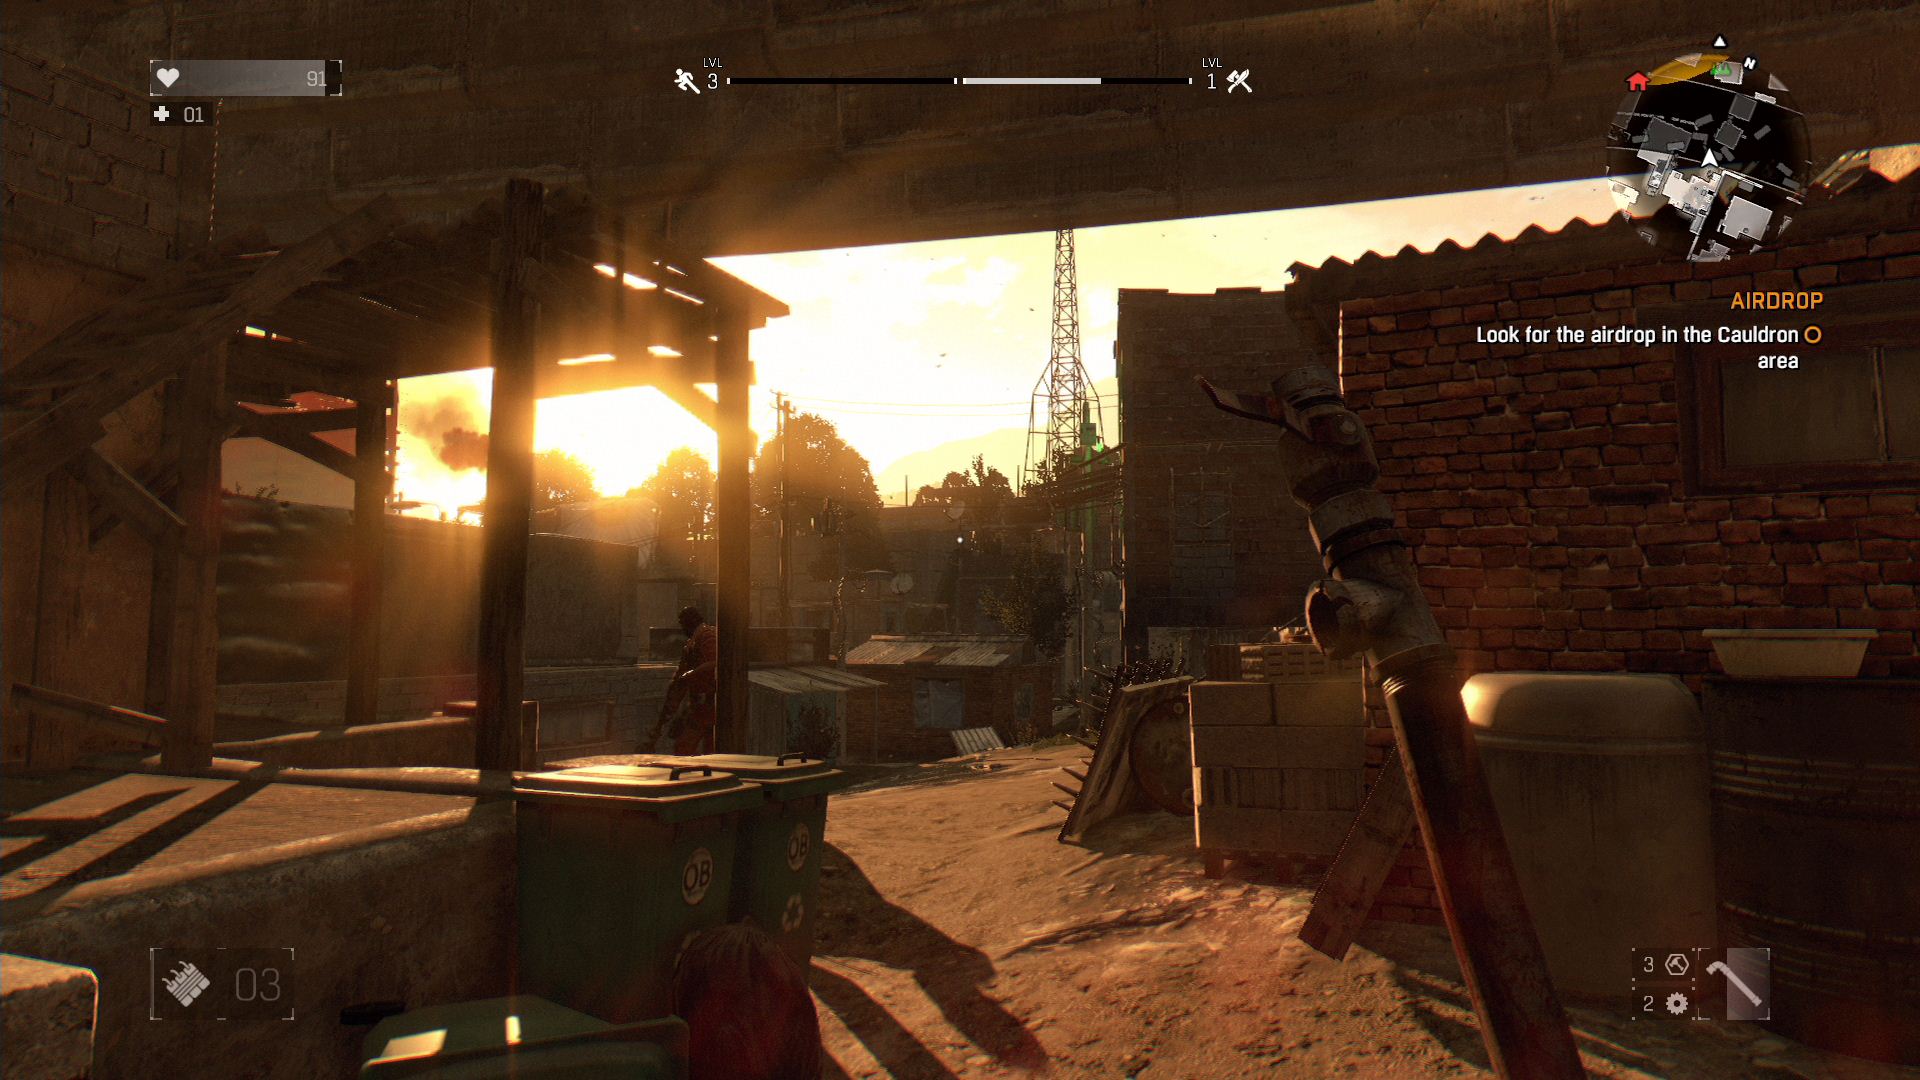 dying light xbox one